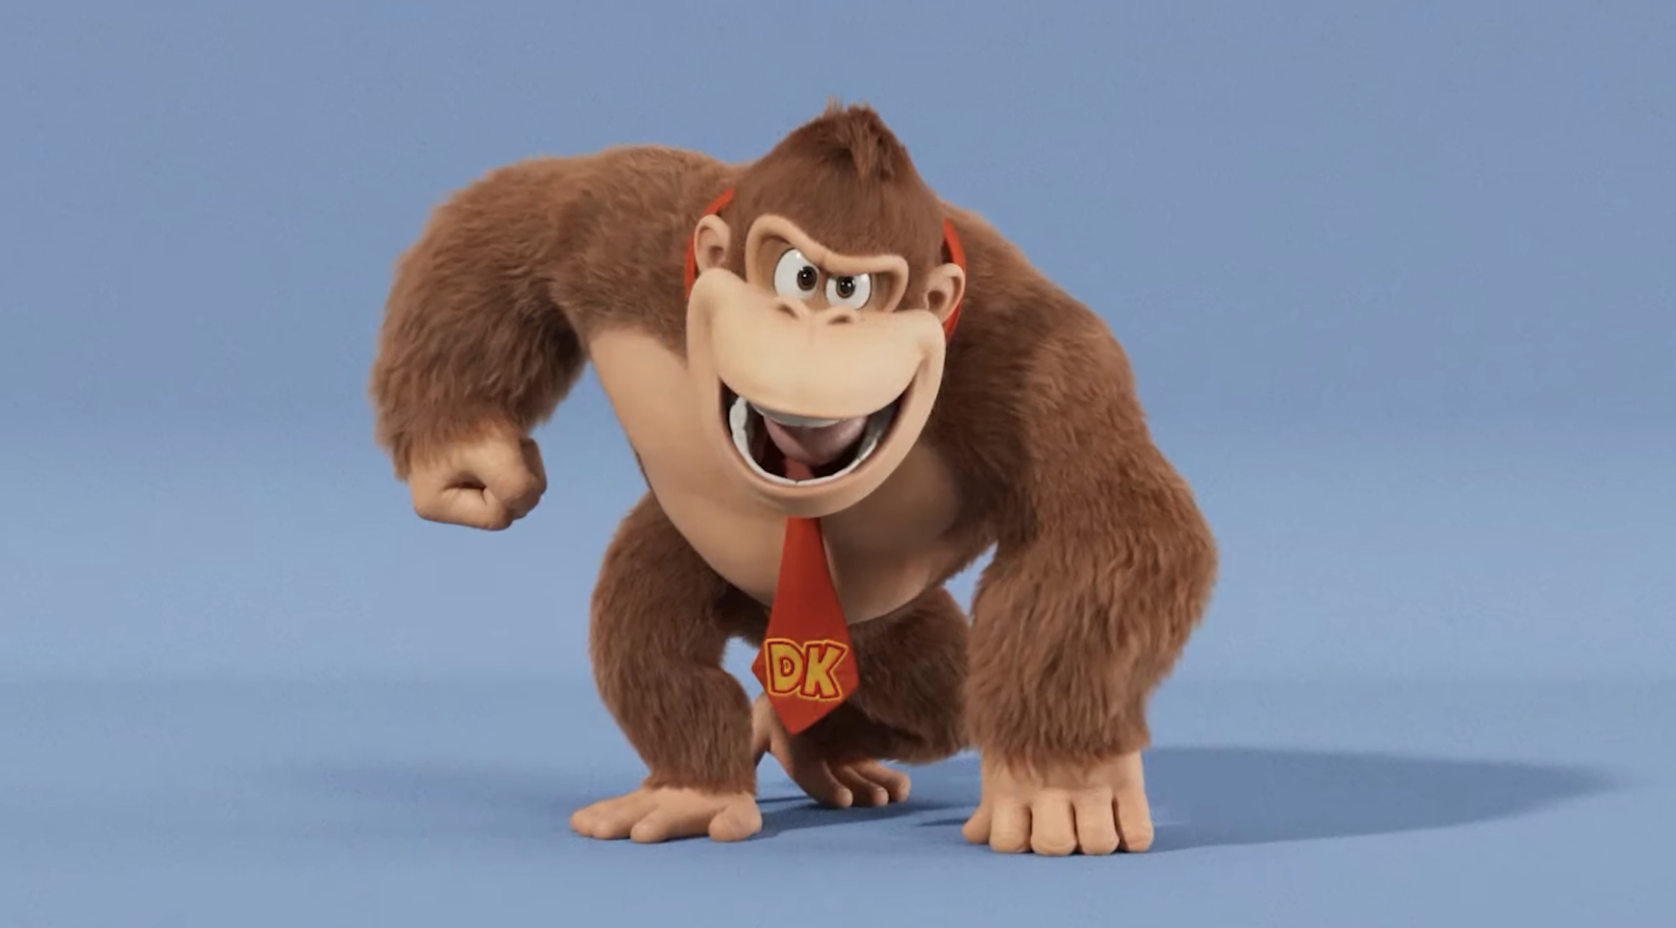 Donkey Kong as he appears in The Super Mario Bros. Movie. He looks like Donkey Kong normally does, with a red necktie �� but his face is narrower and more mischievous. Perhaps...evil